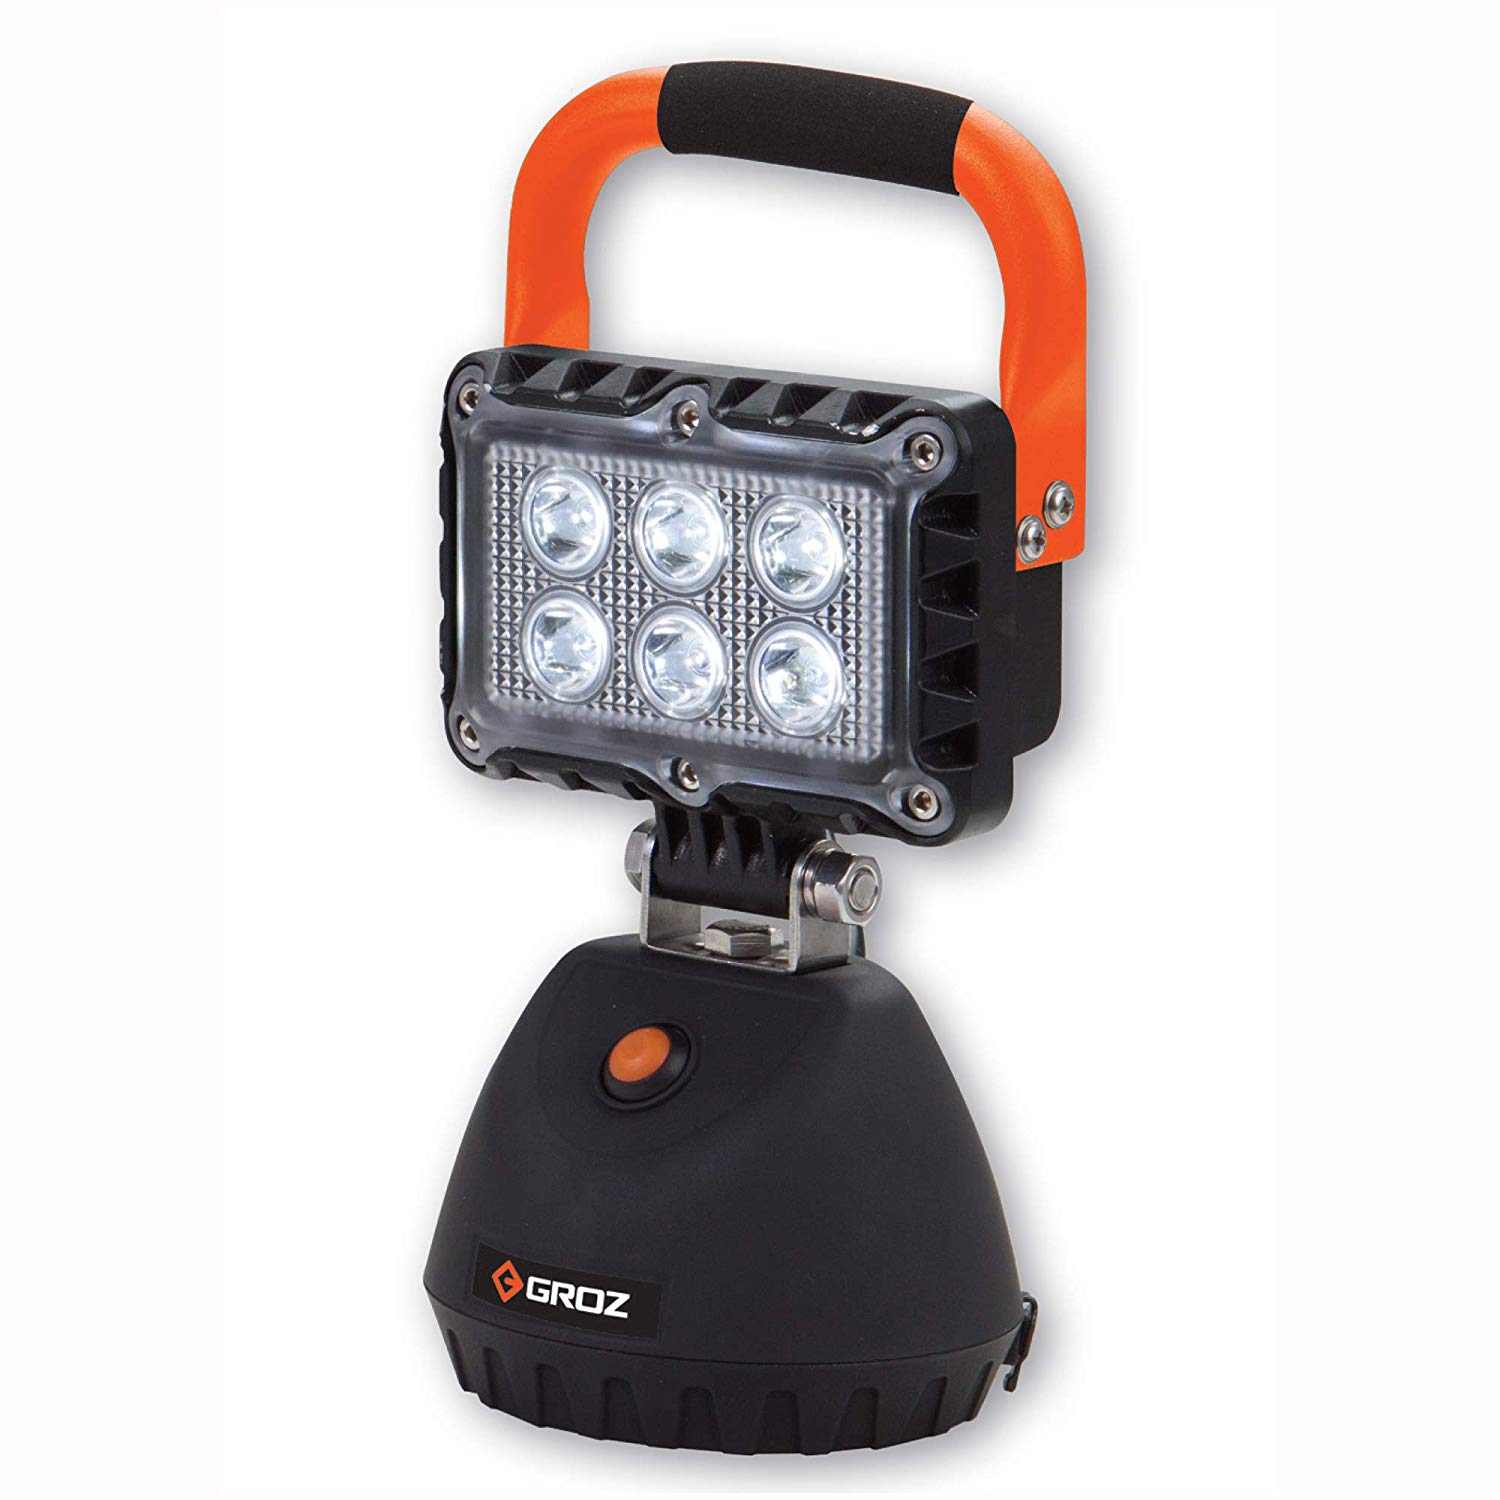 GROZ LED/621 - Portable Rechargeable LED Work Light/lamp 18W